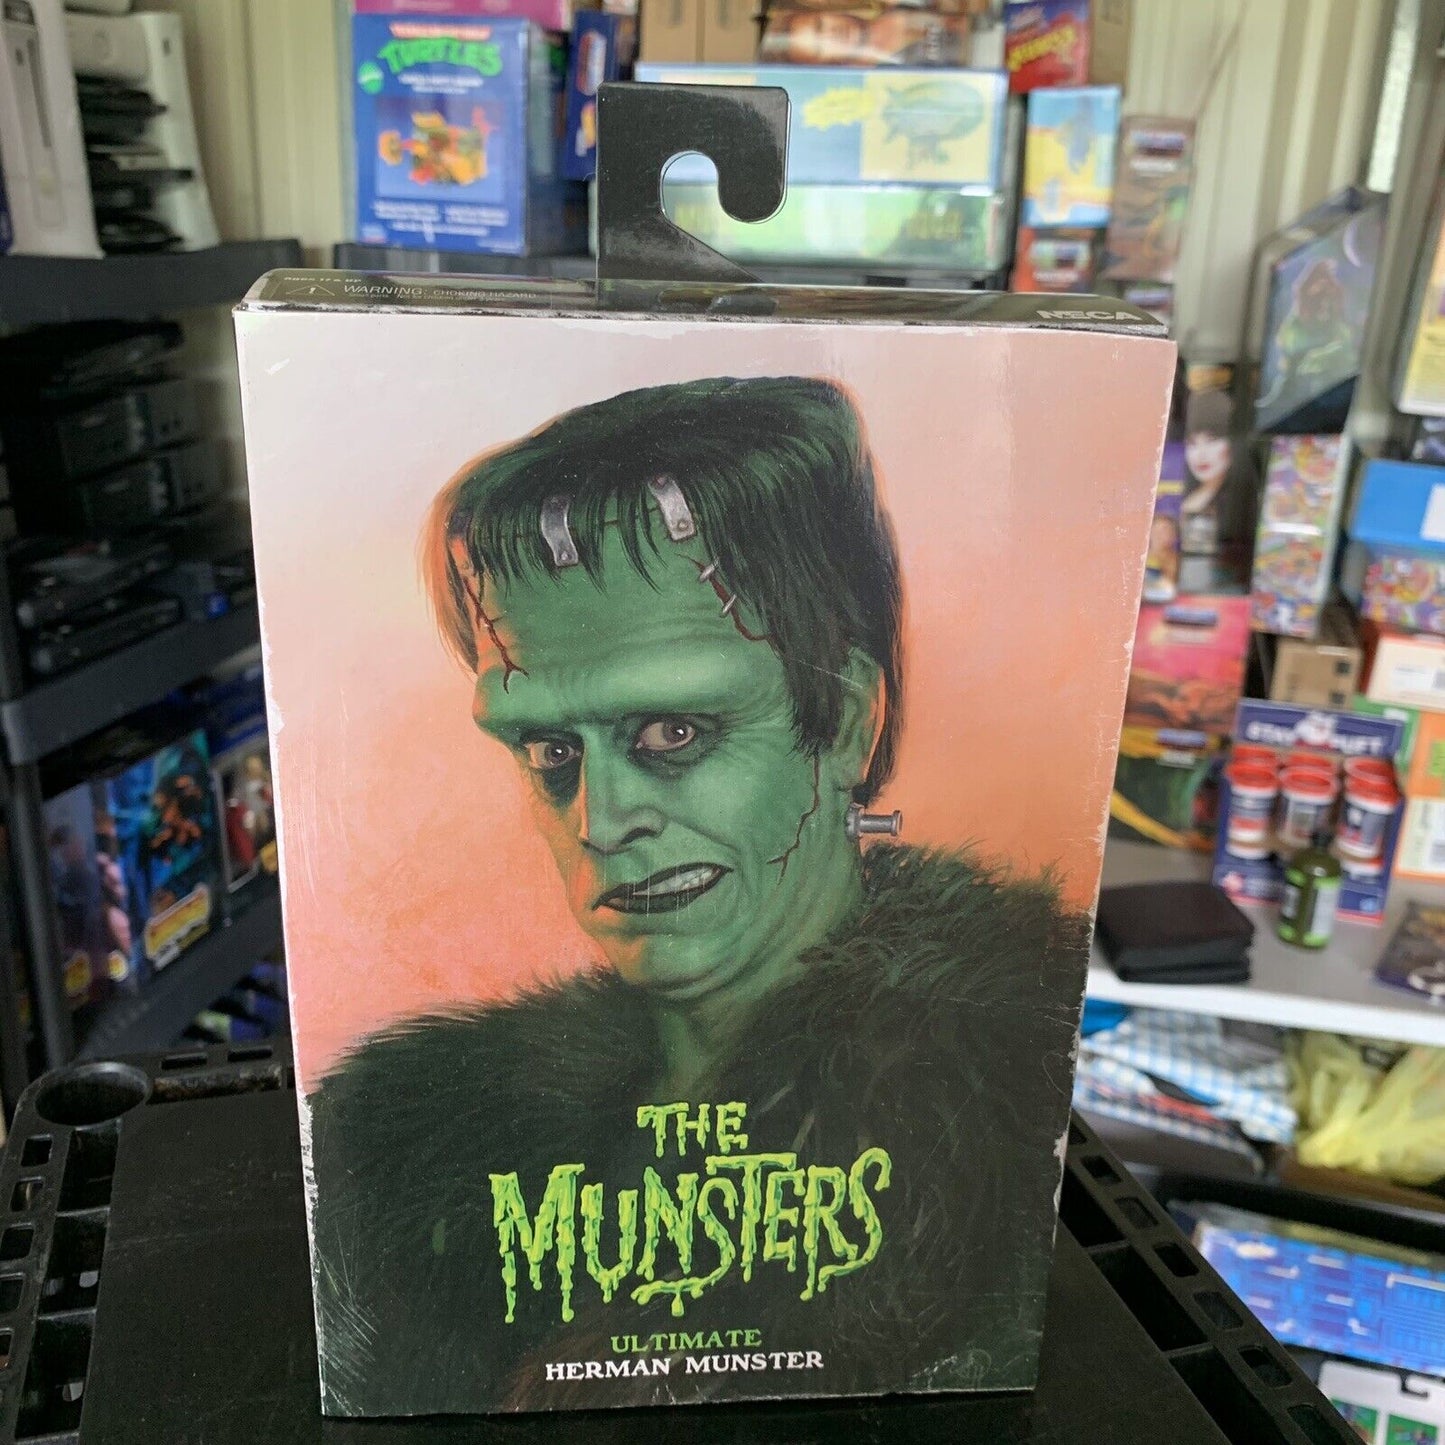 NECA Herman Munster The Munsters Ultimate 7" Action Figure 1:12 Scale Official